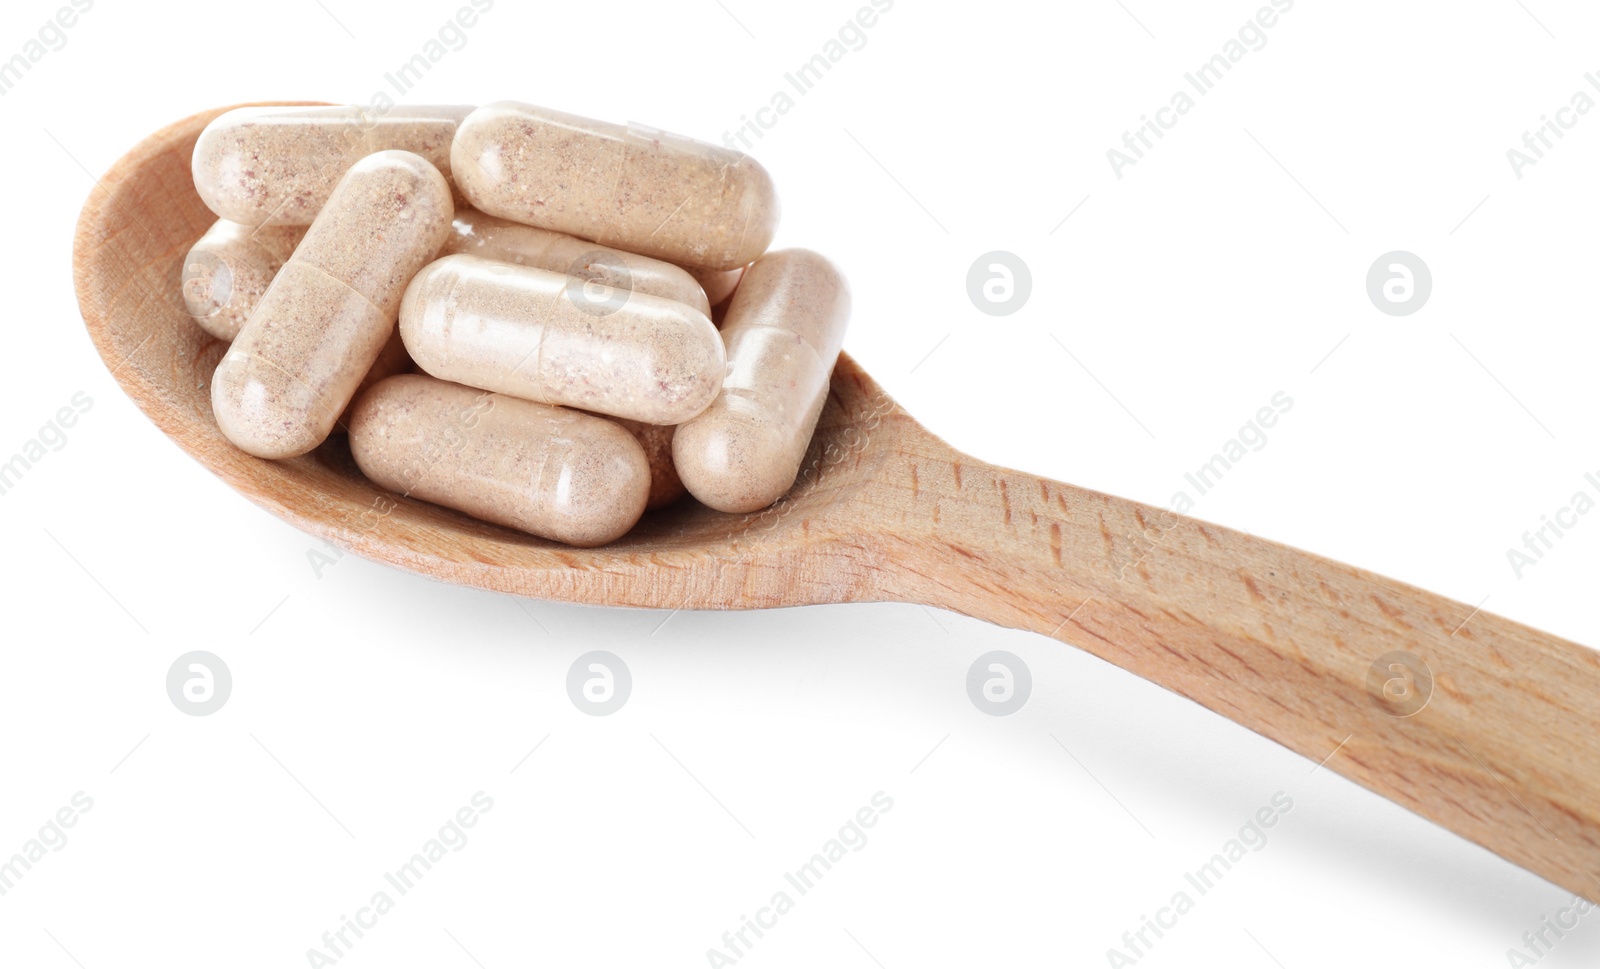 Photo of Gelatin capsules in spoon on white background